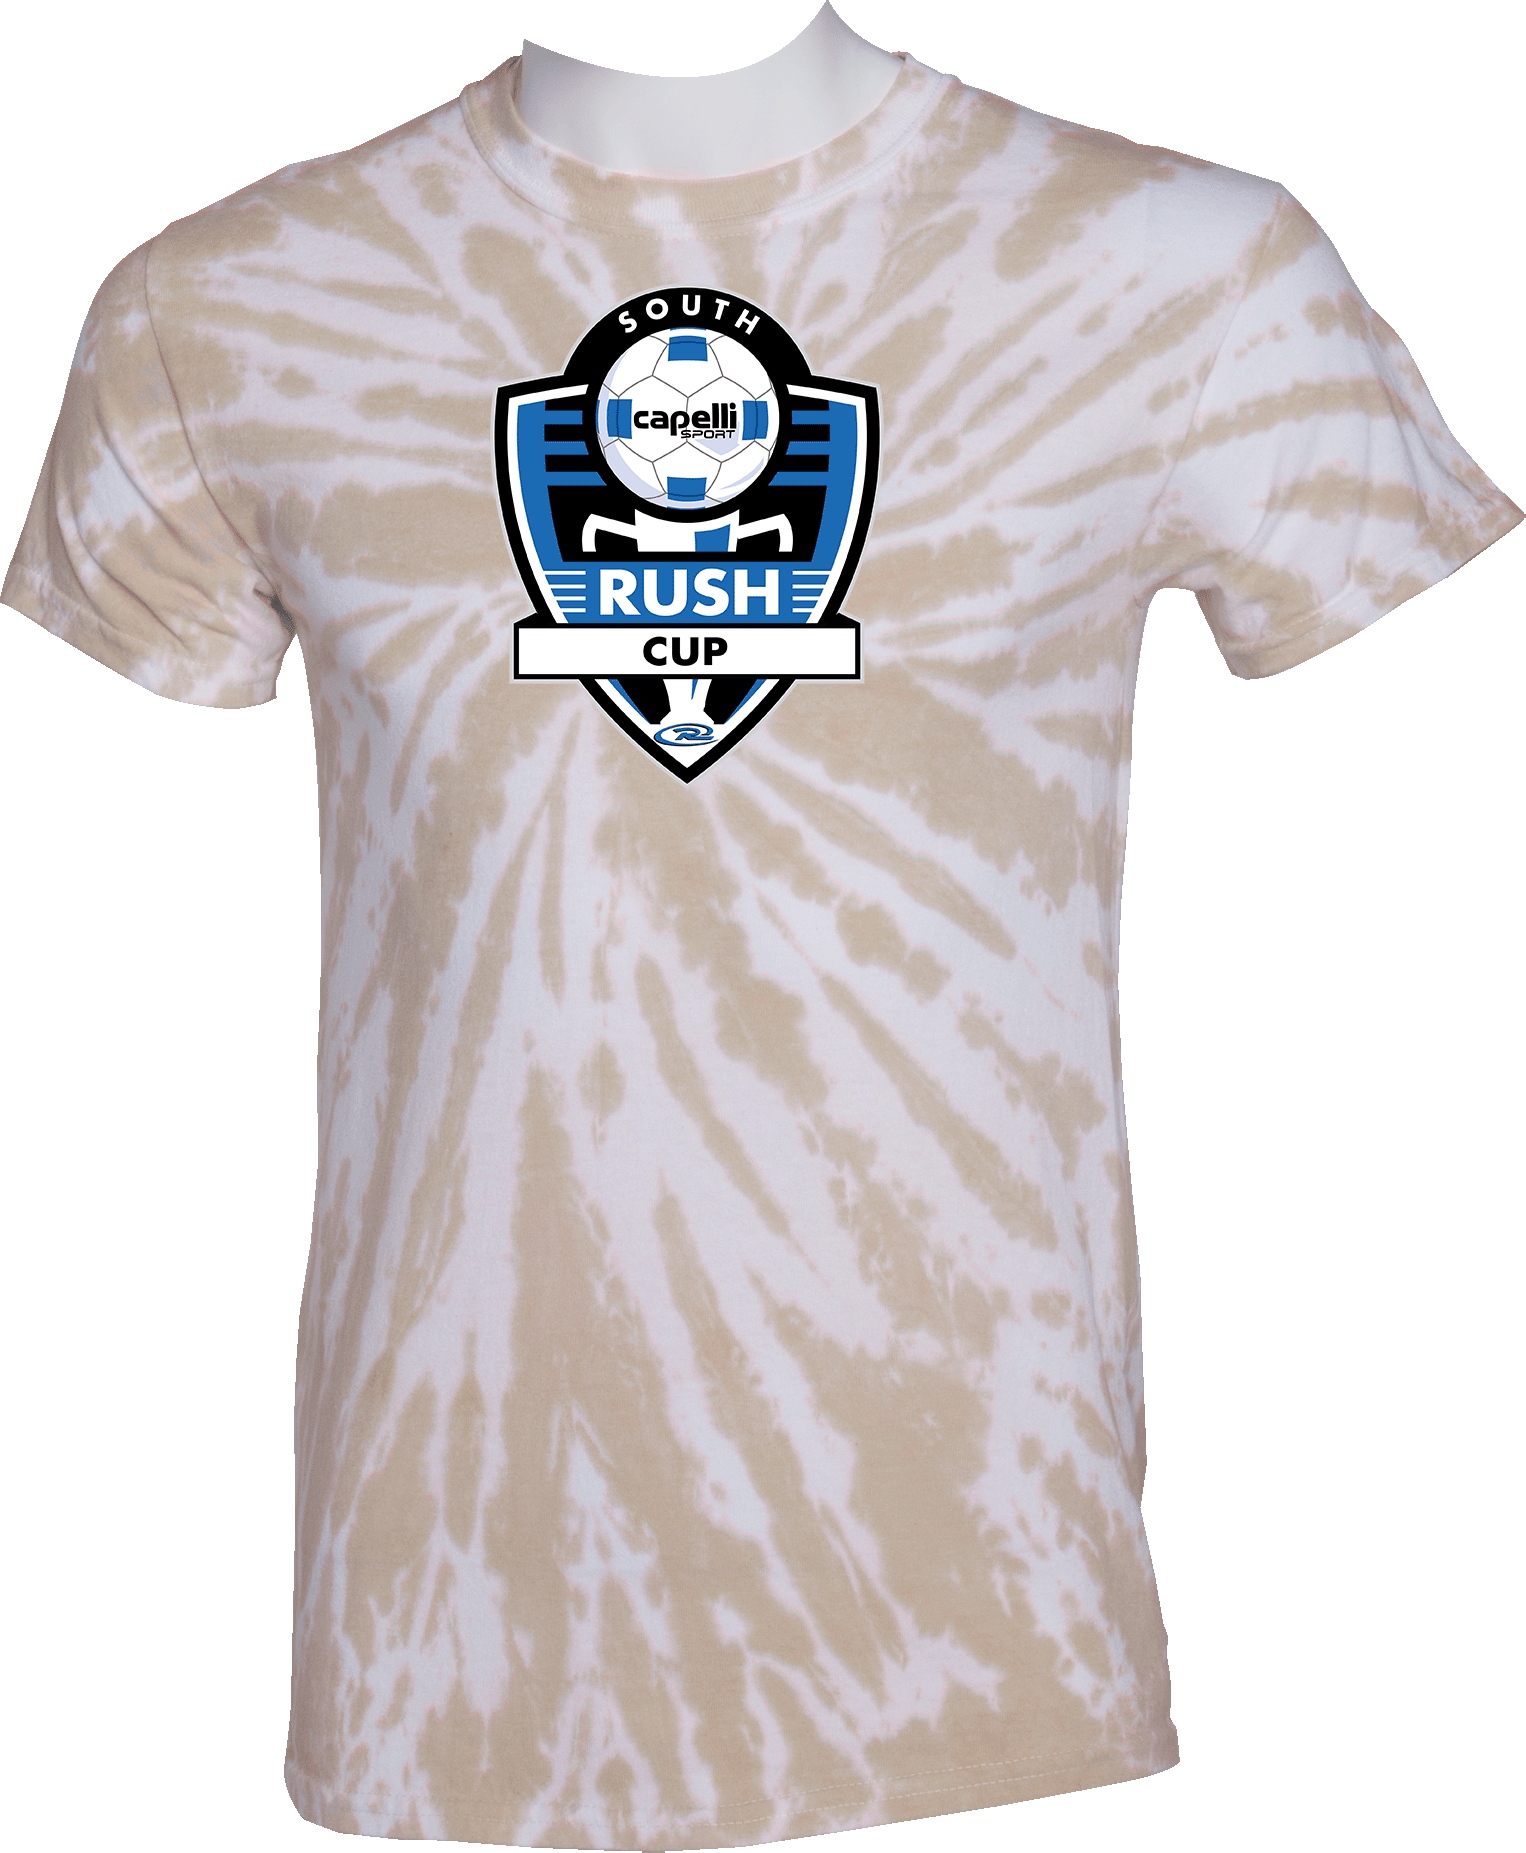 Tie-Dye Short Sleeves - 2024 South Rush Cup